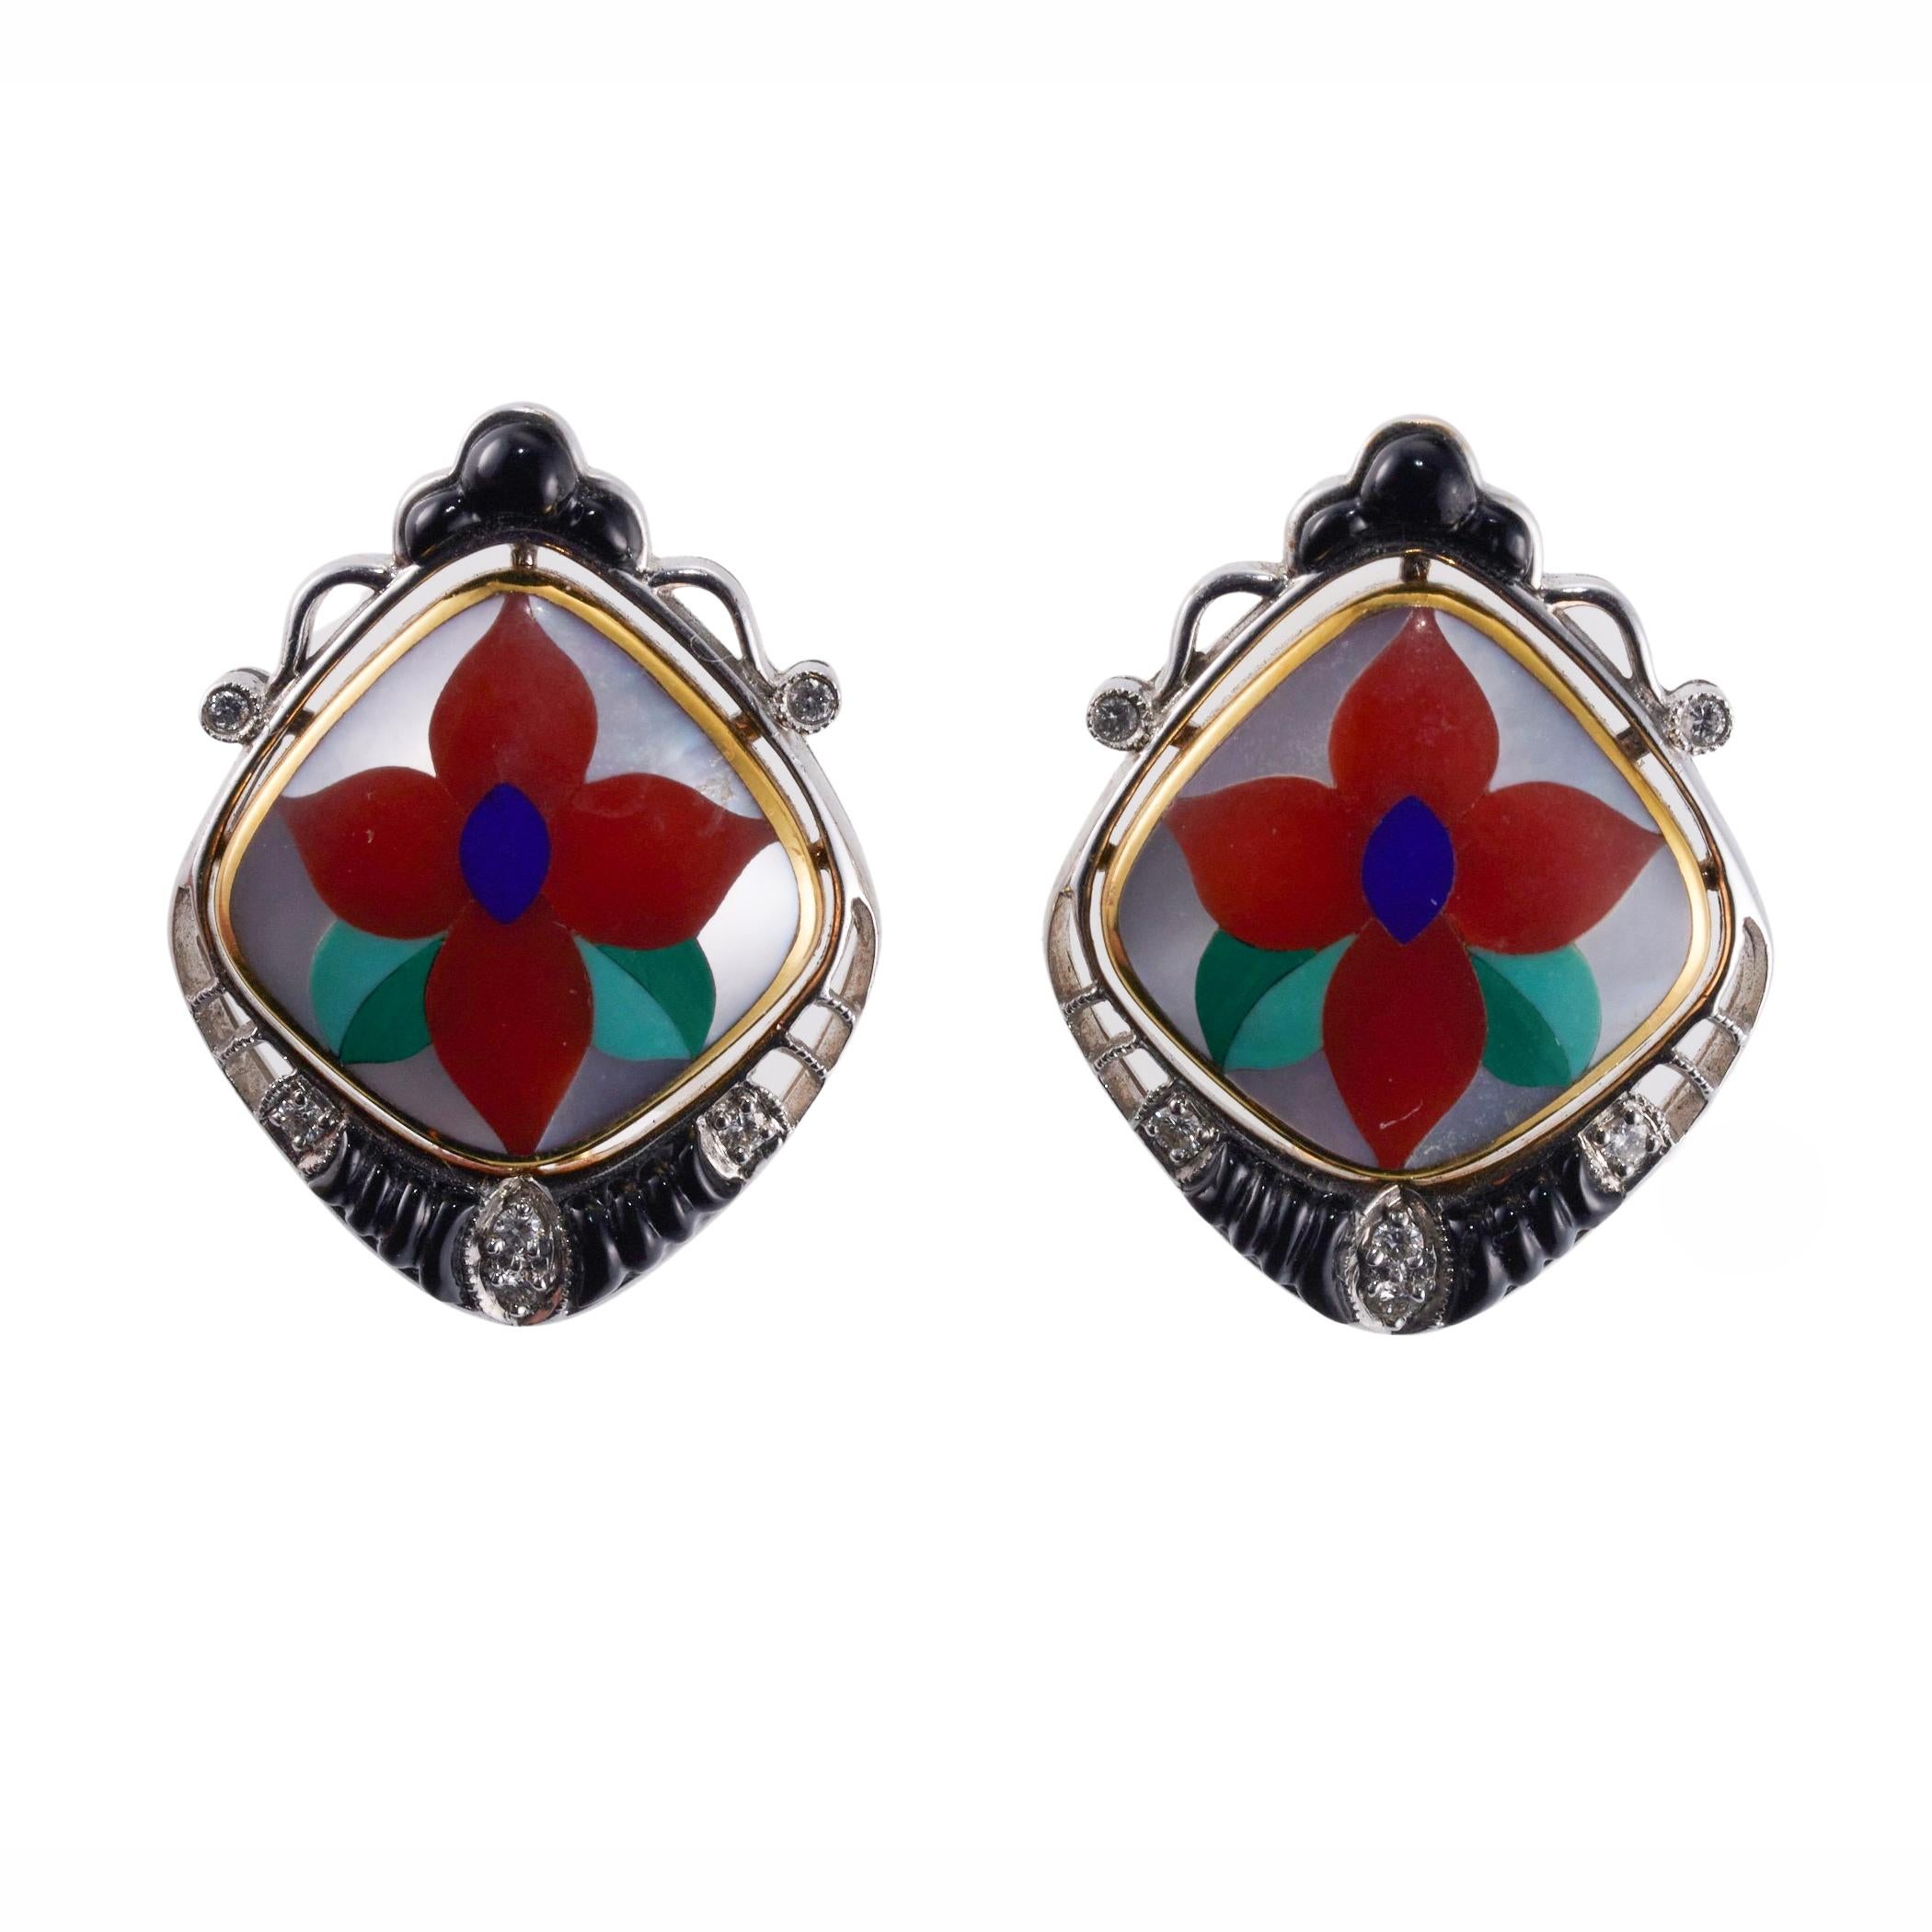 A 14k yellow gold ring set with inlay mother of pearl , malachite, coral and approx. 0.10ctw H/VS diamonds. Earrings are 28mm x 20mm. 15.7 grams.